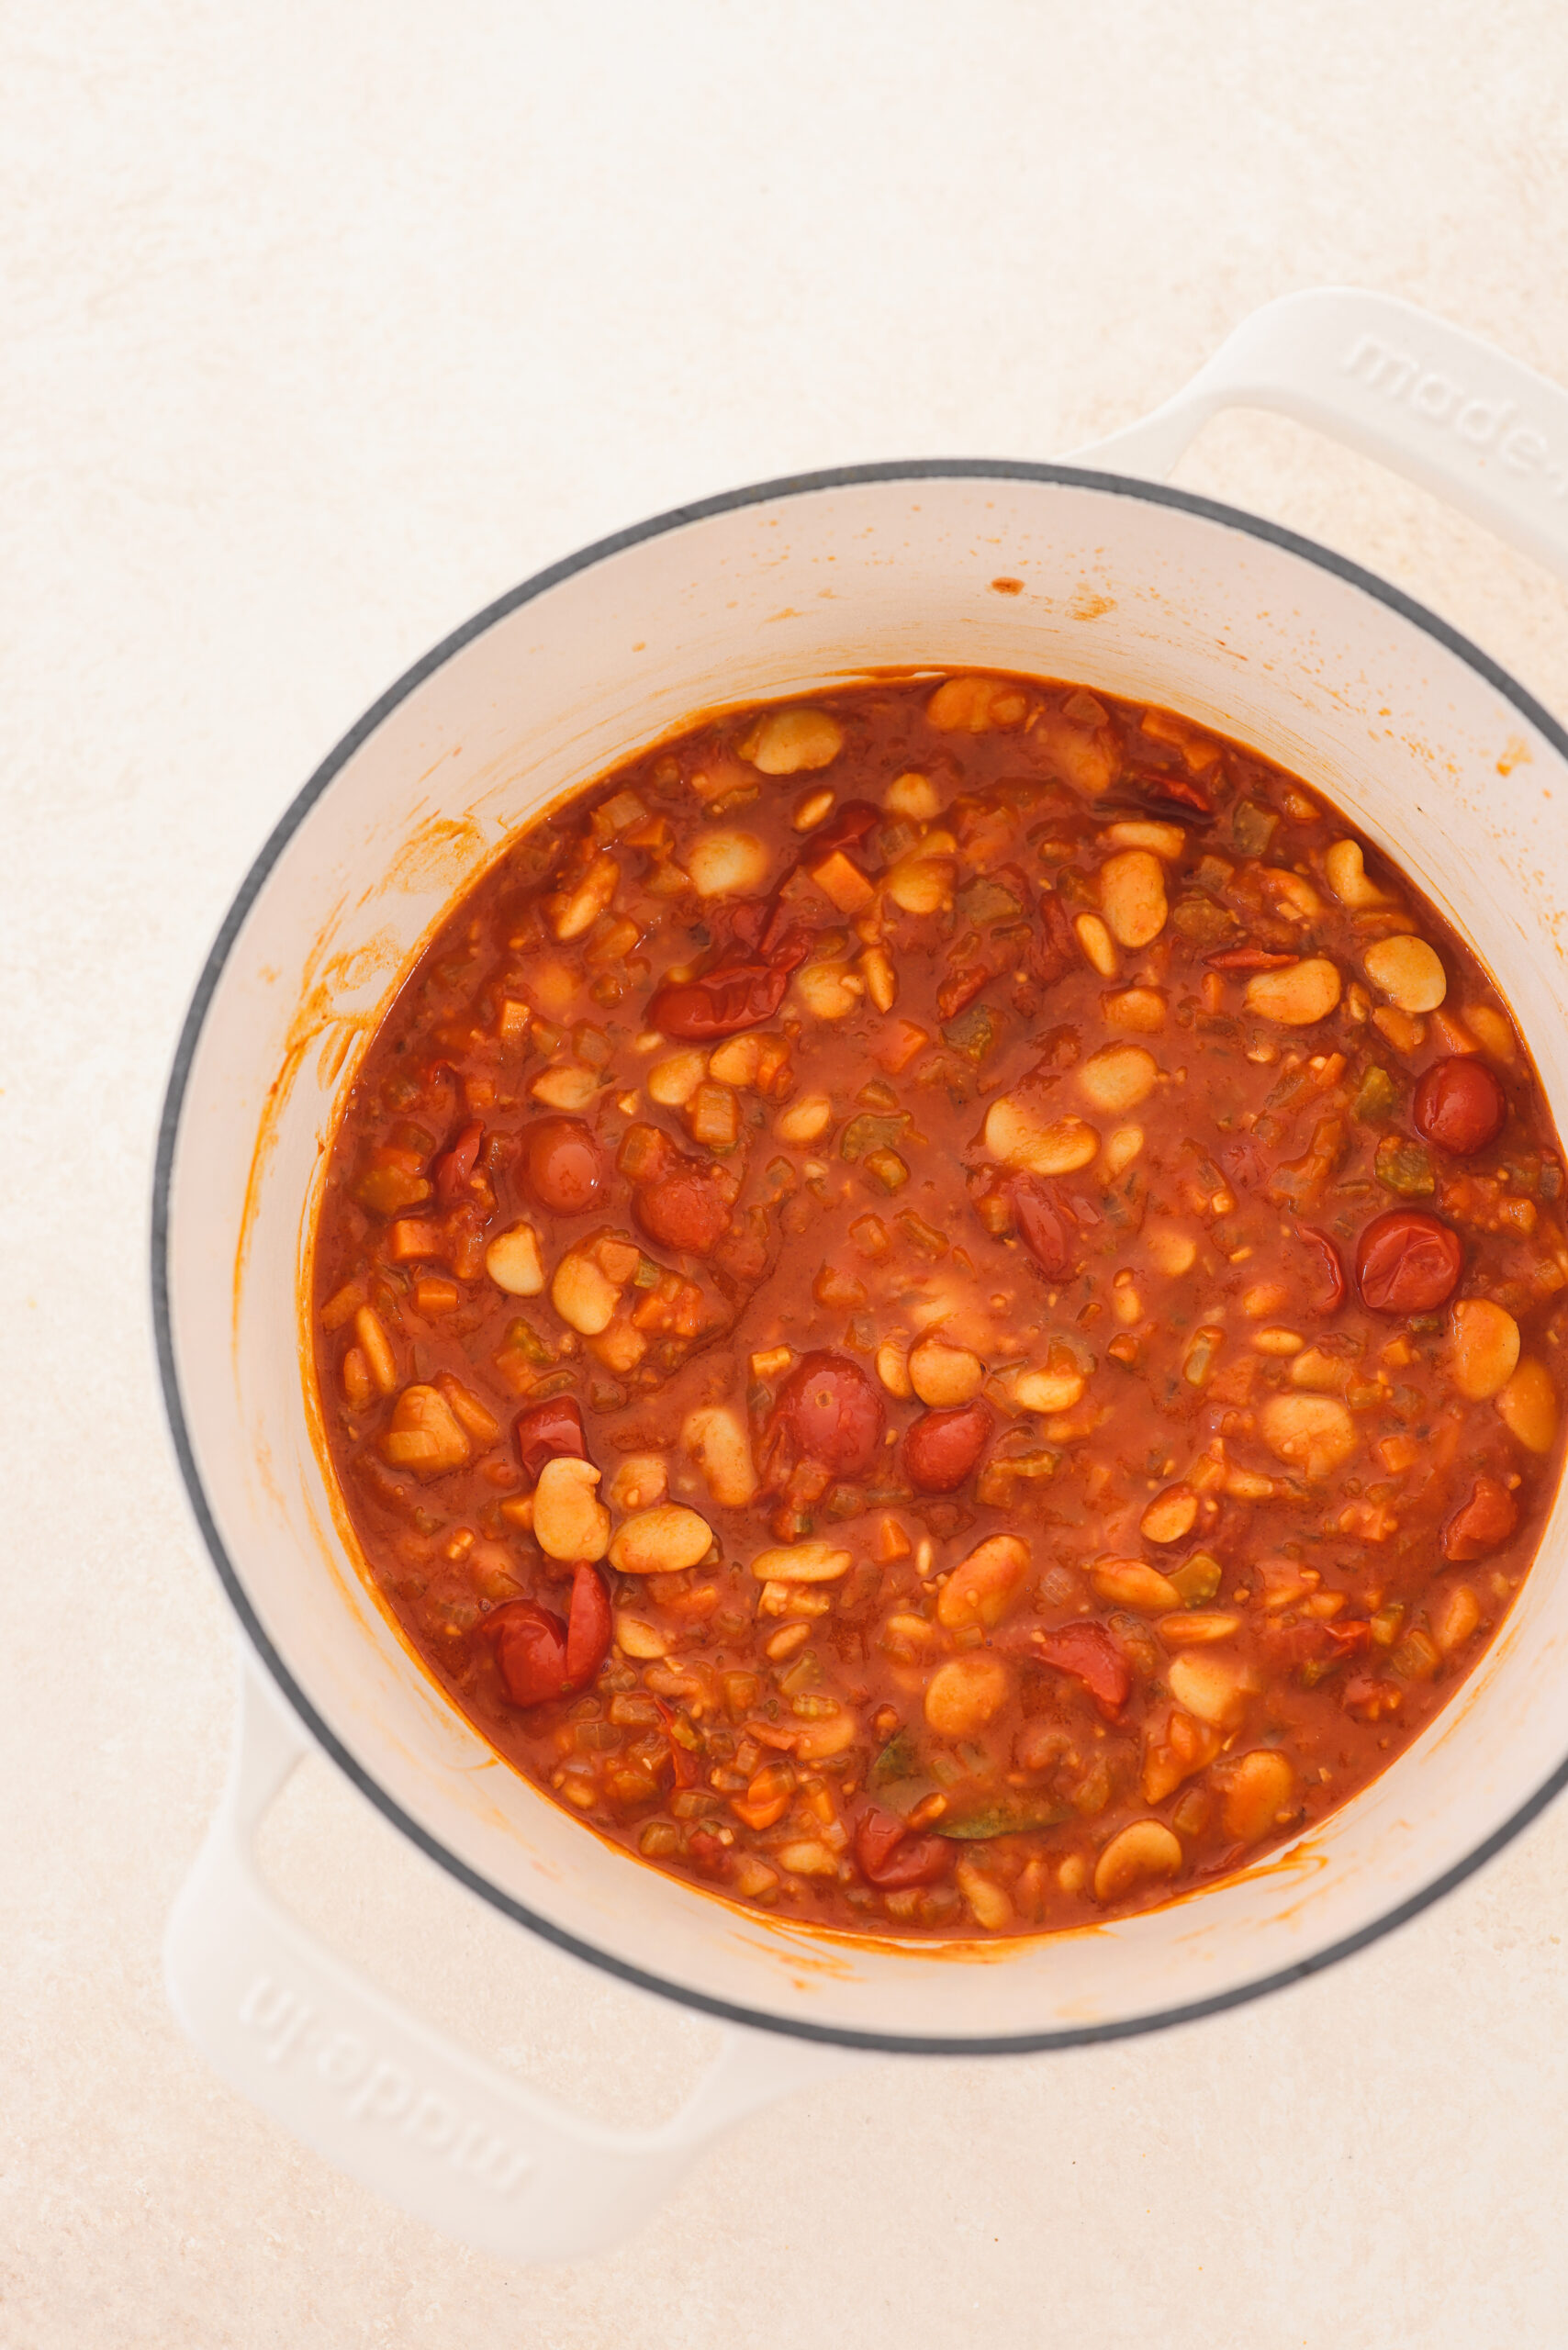 photo showing vegan chili ingredients simmering in a pot